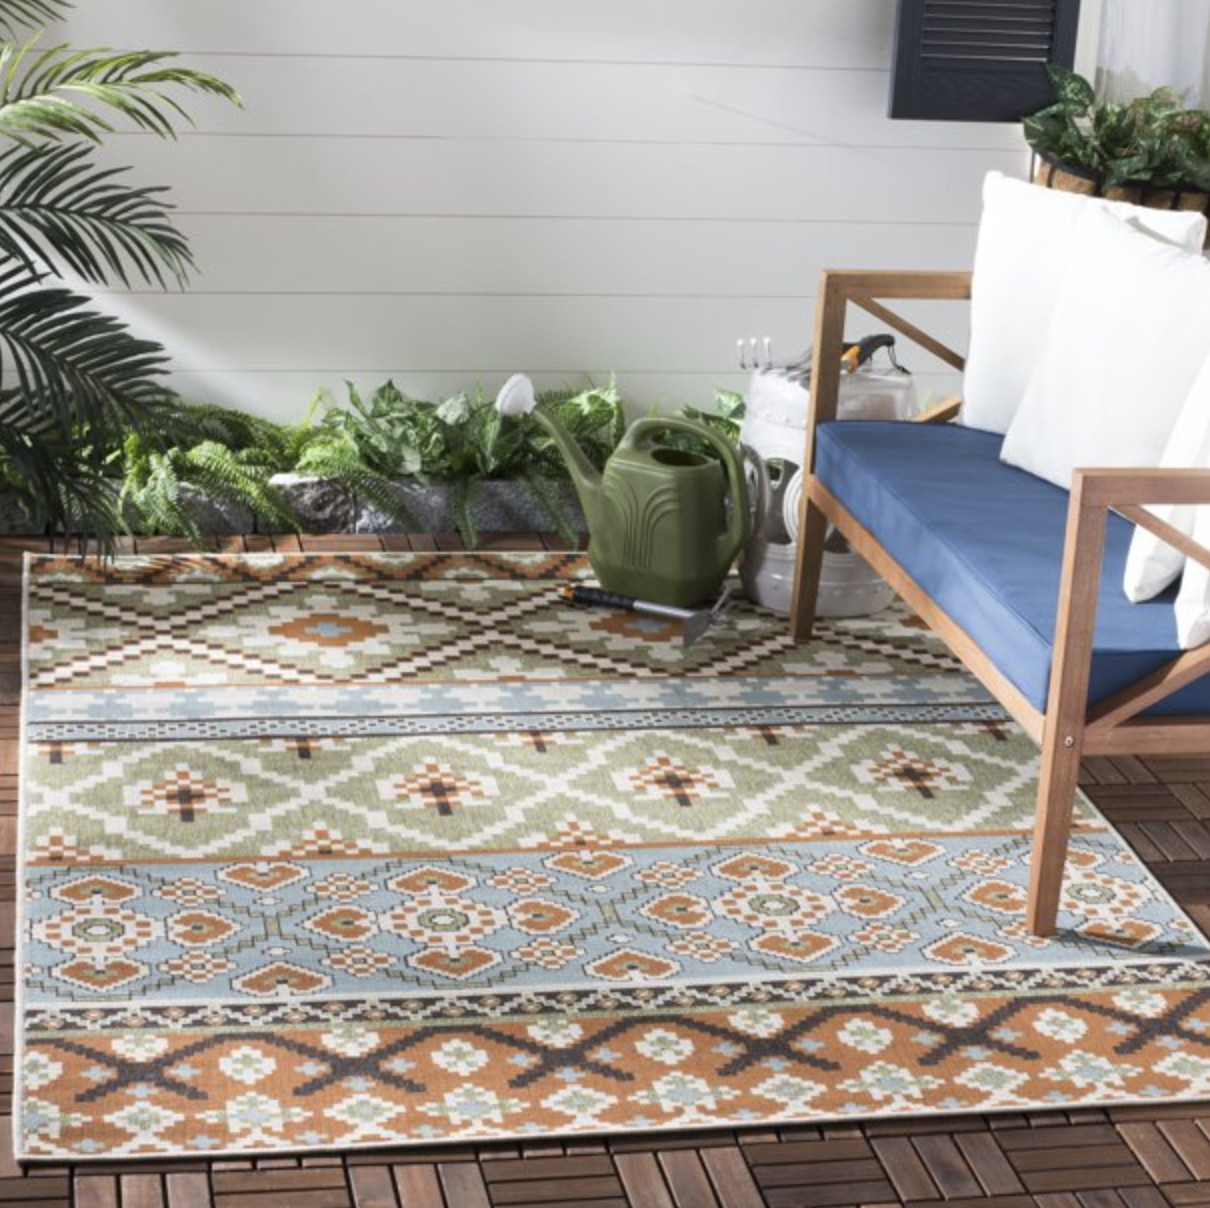 The southwestern indoor outdoor rug on a patio